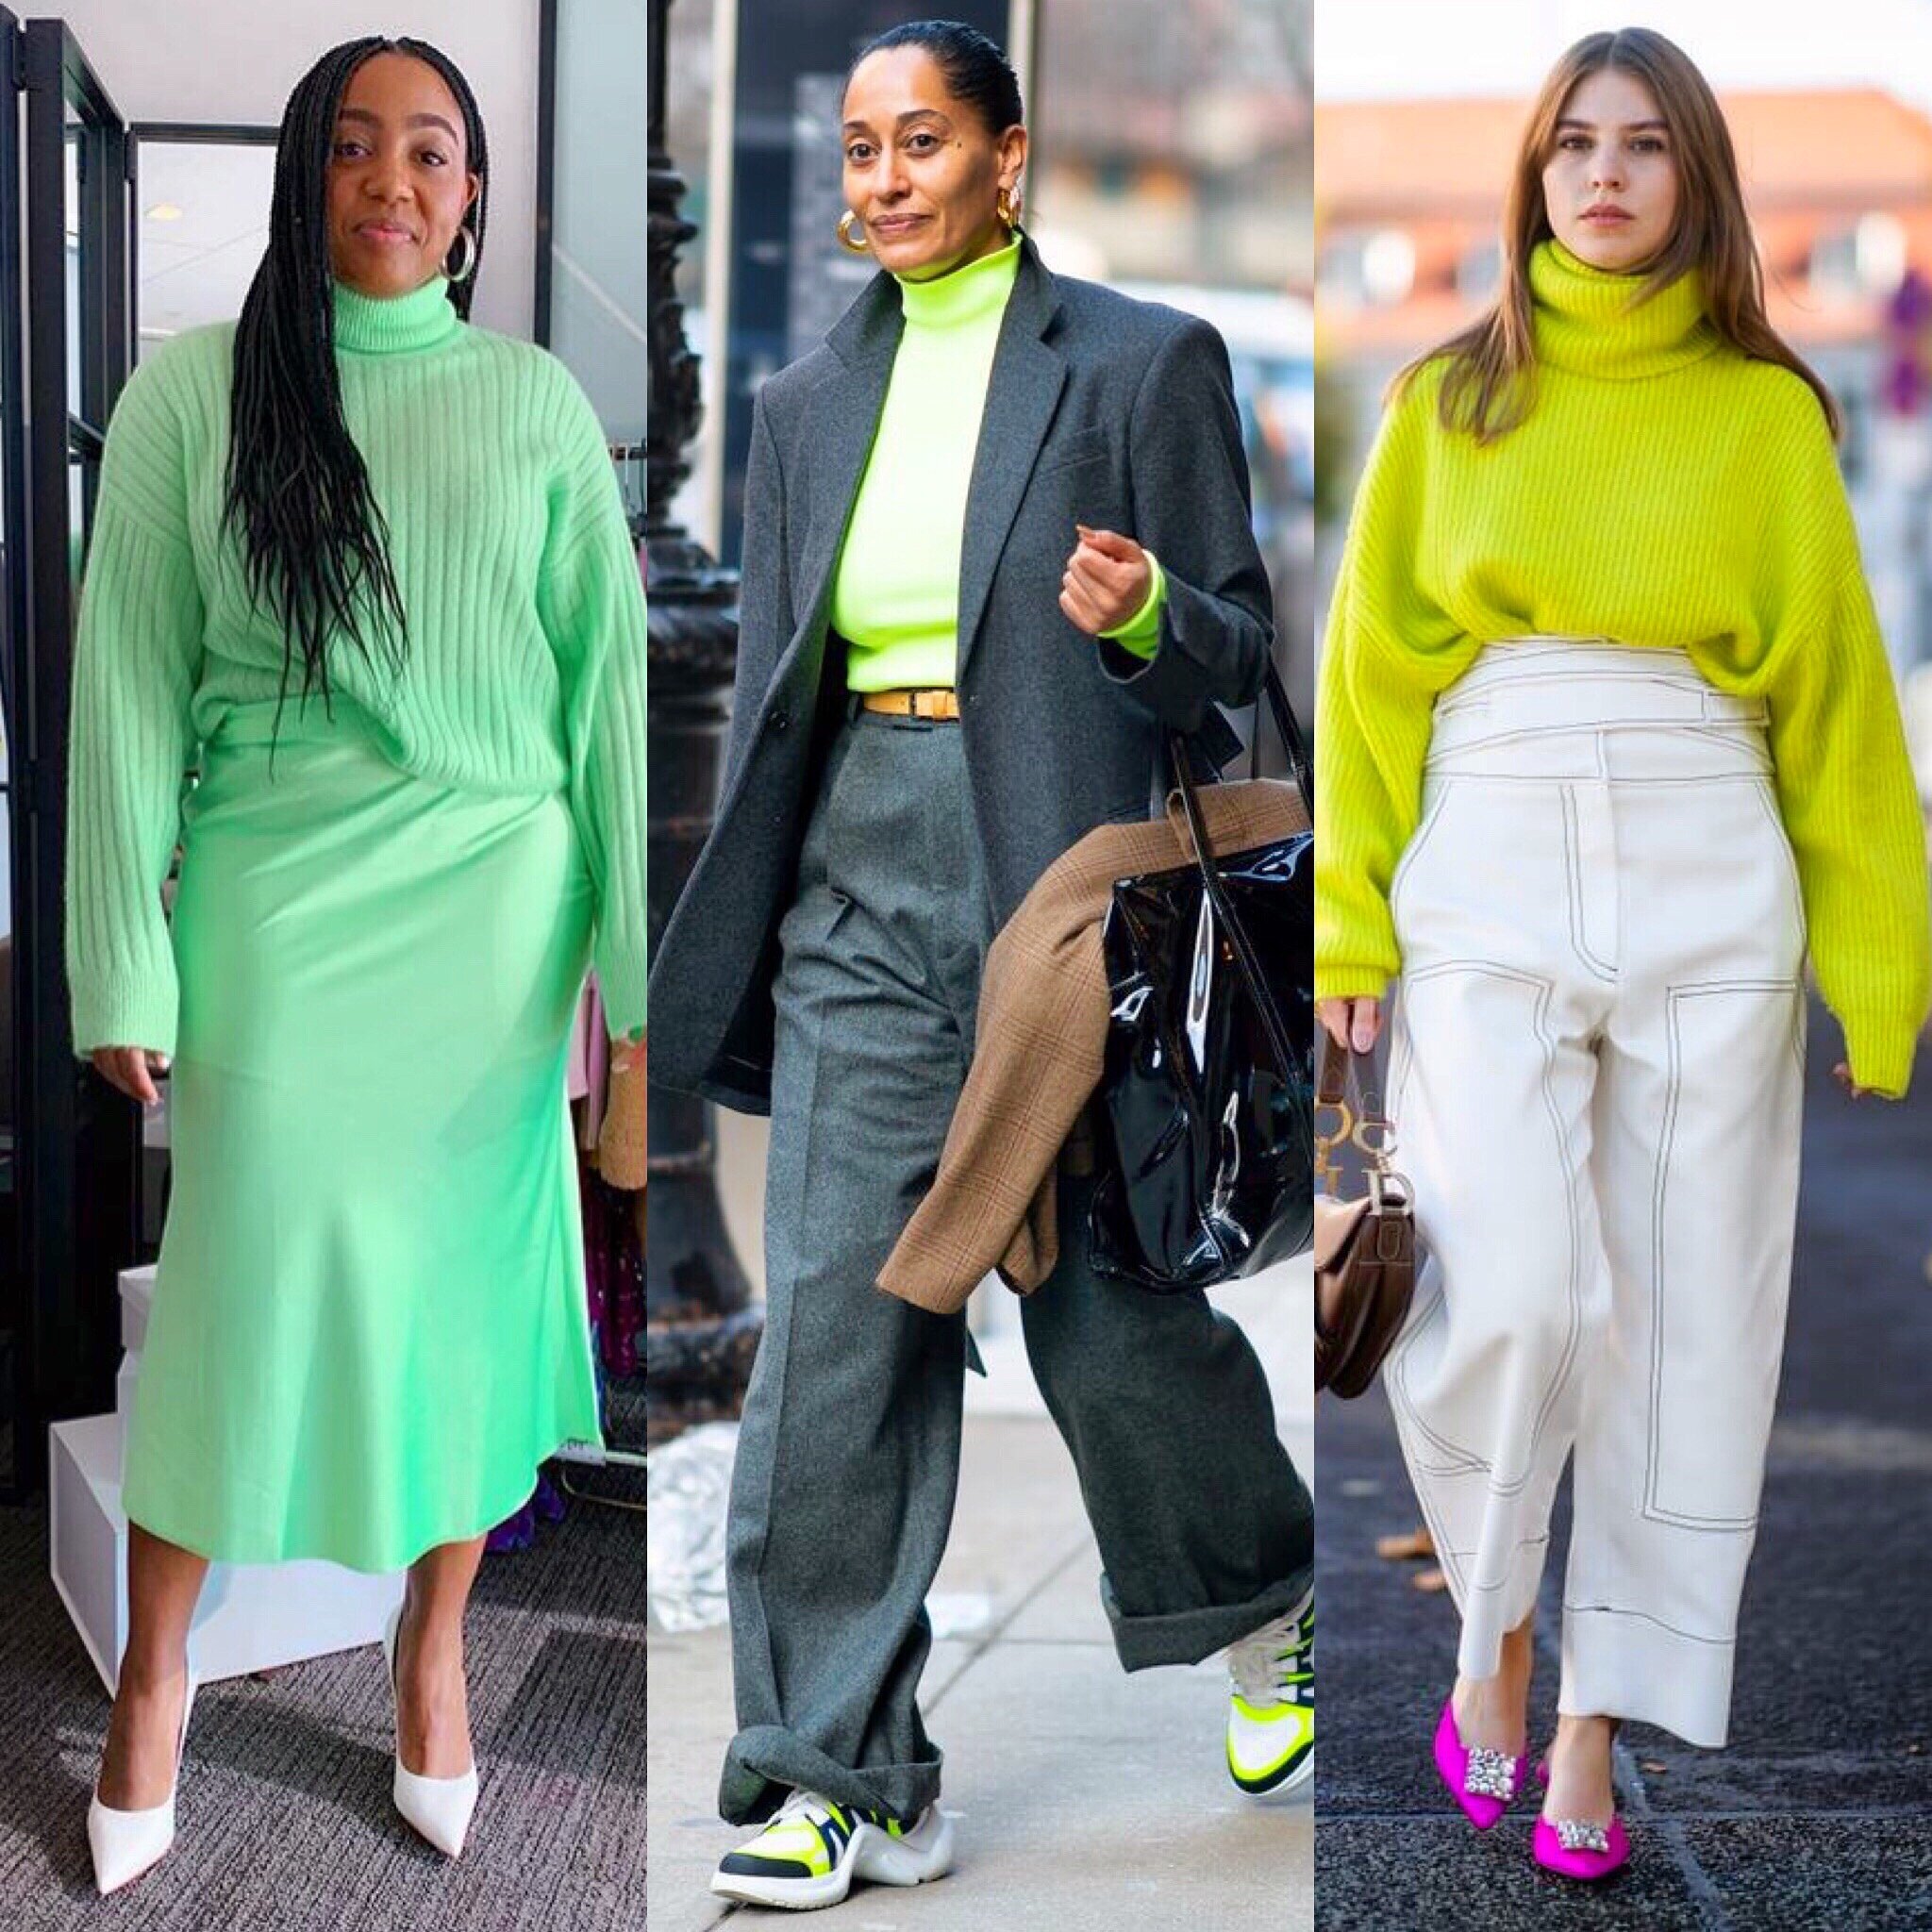   If you didn’t get enough neon or bright colors this summer, this is by far the chicest way to carry the trend into fall/winter. In addition to being cozy, it helps you avoid that all-black winter aesthetic we often fall prey to. You can go monochro